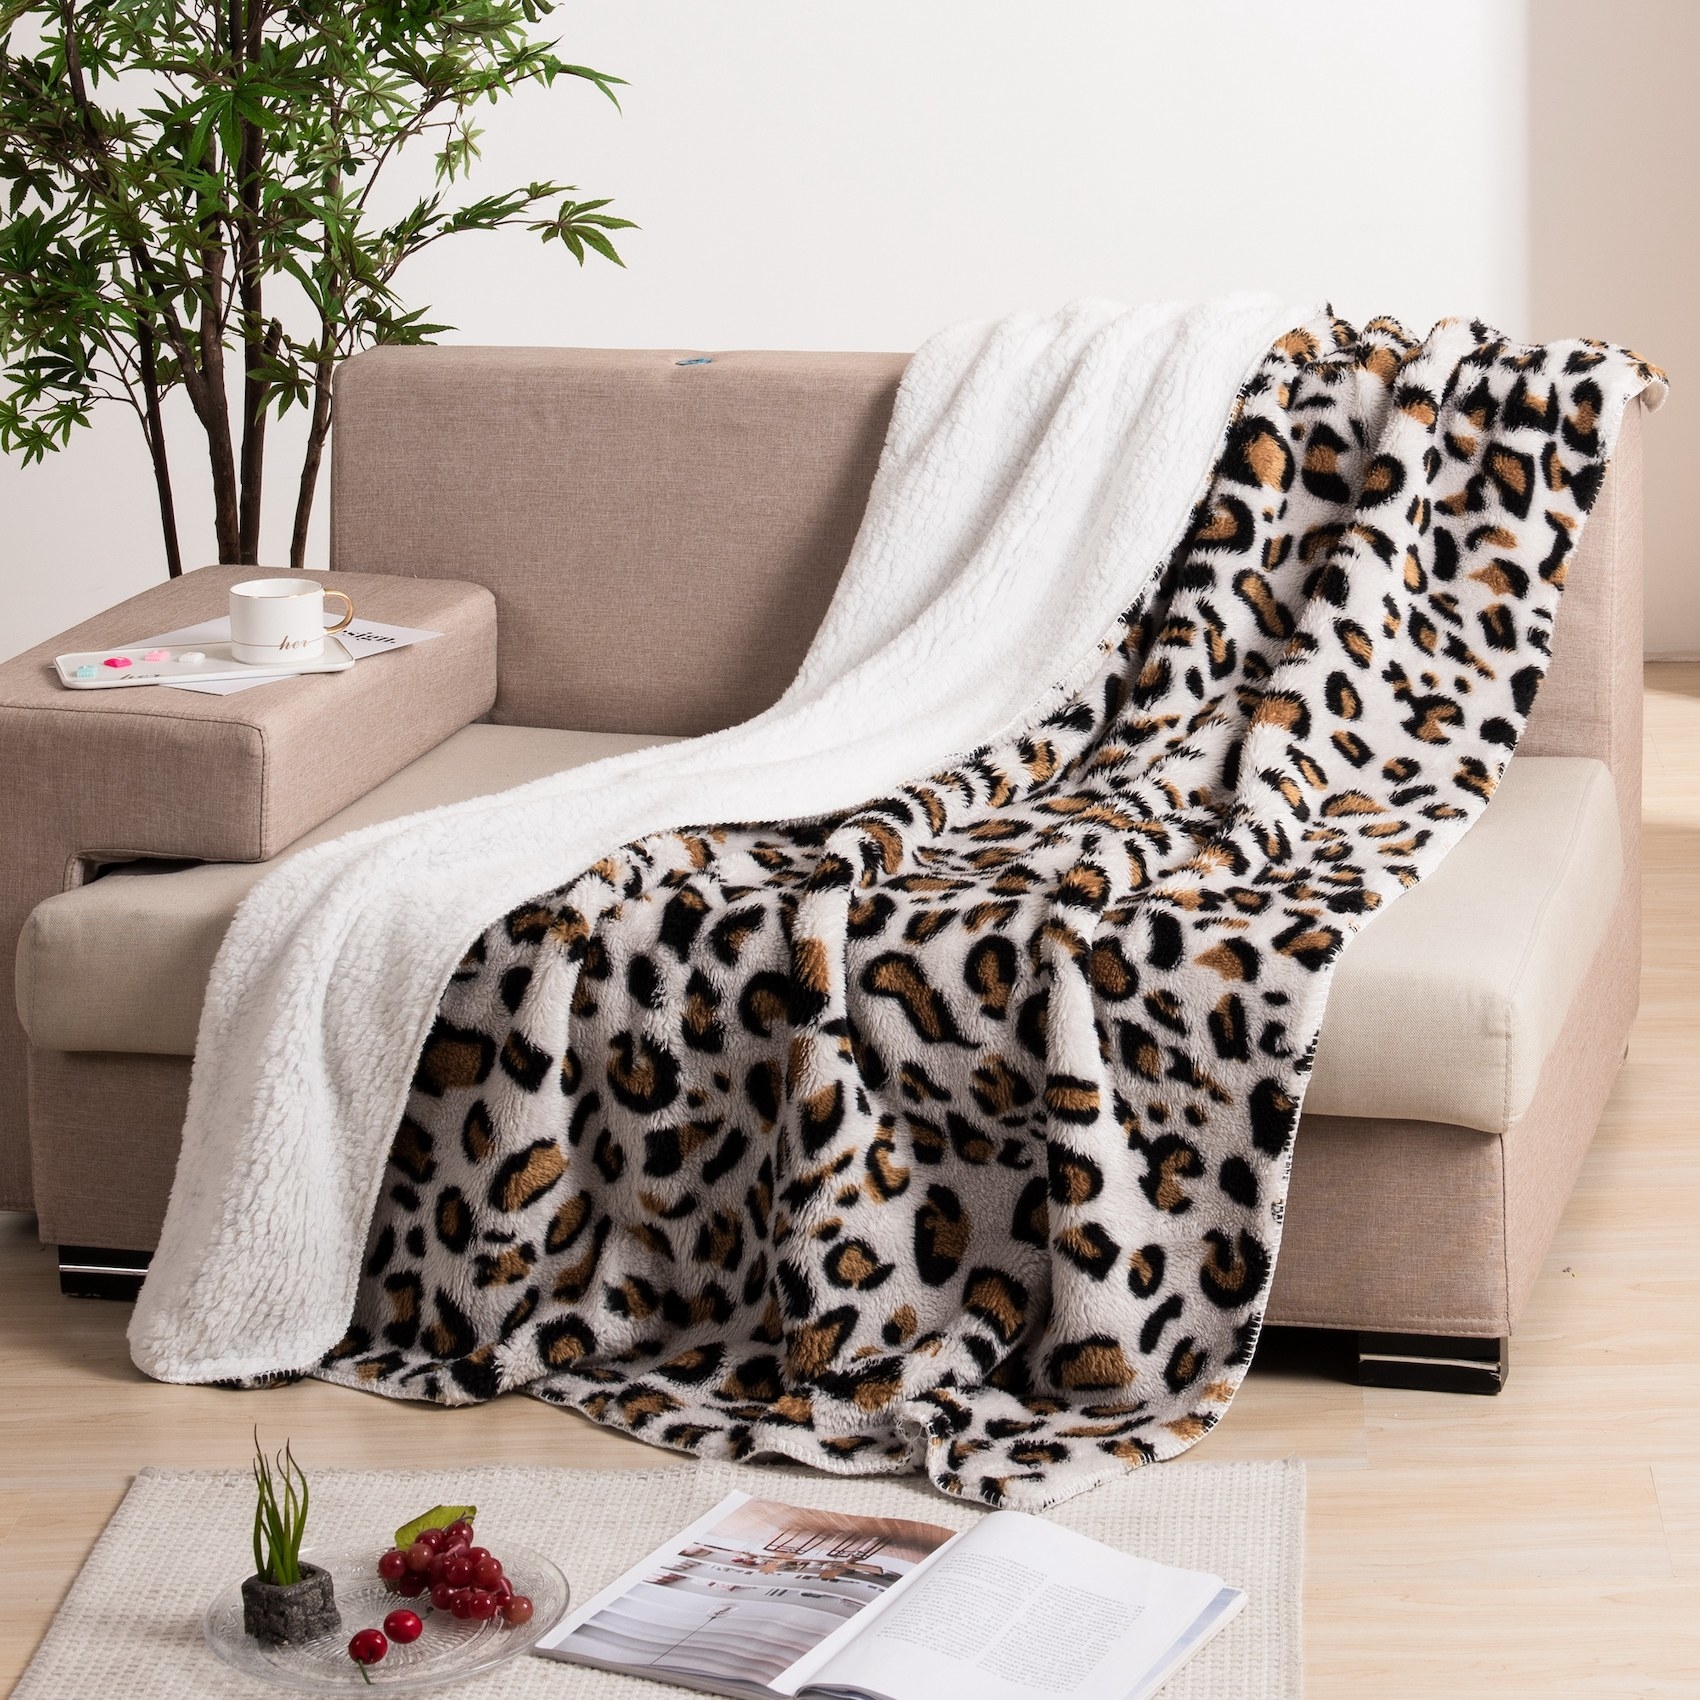 The reversible leopard-print throw on a couch with the other ivory side showing as well